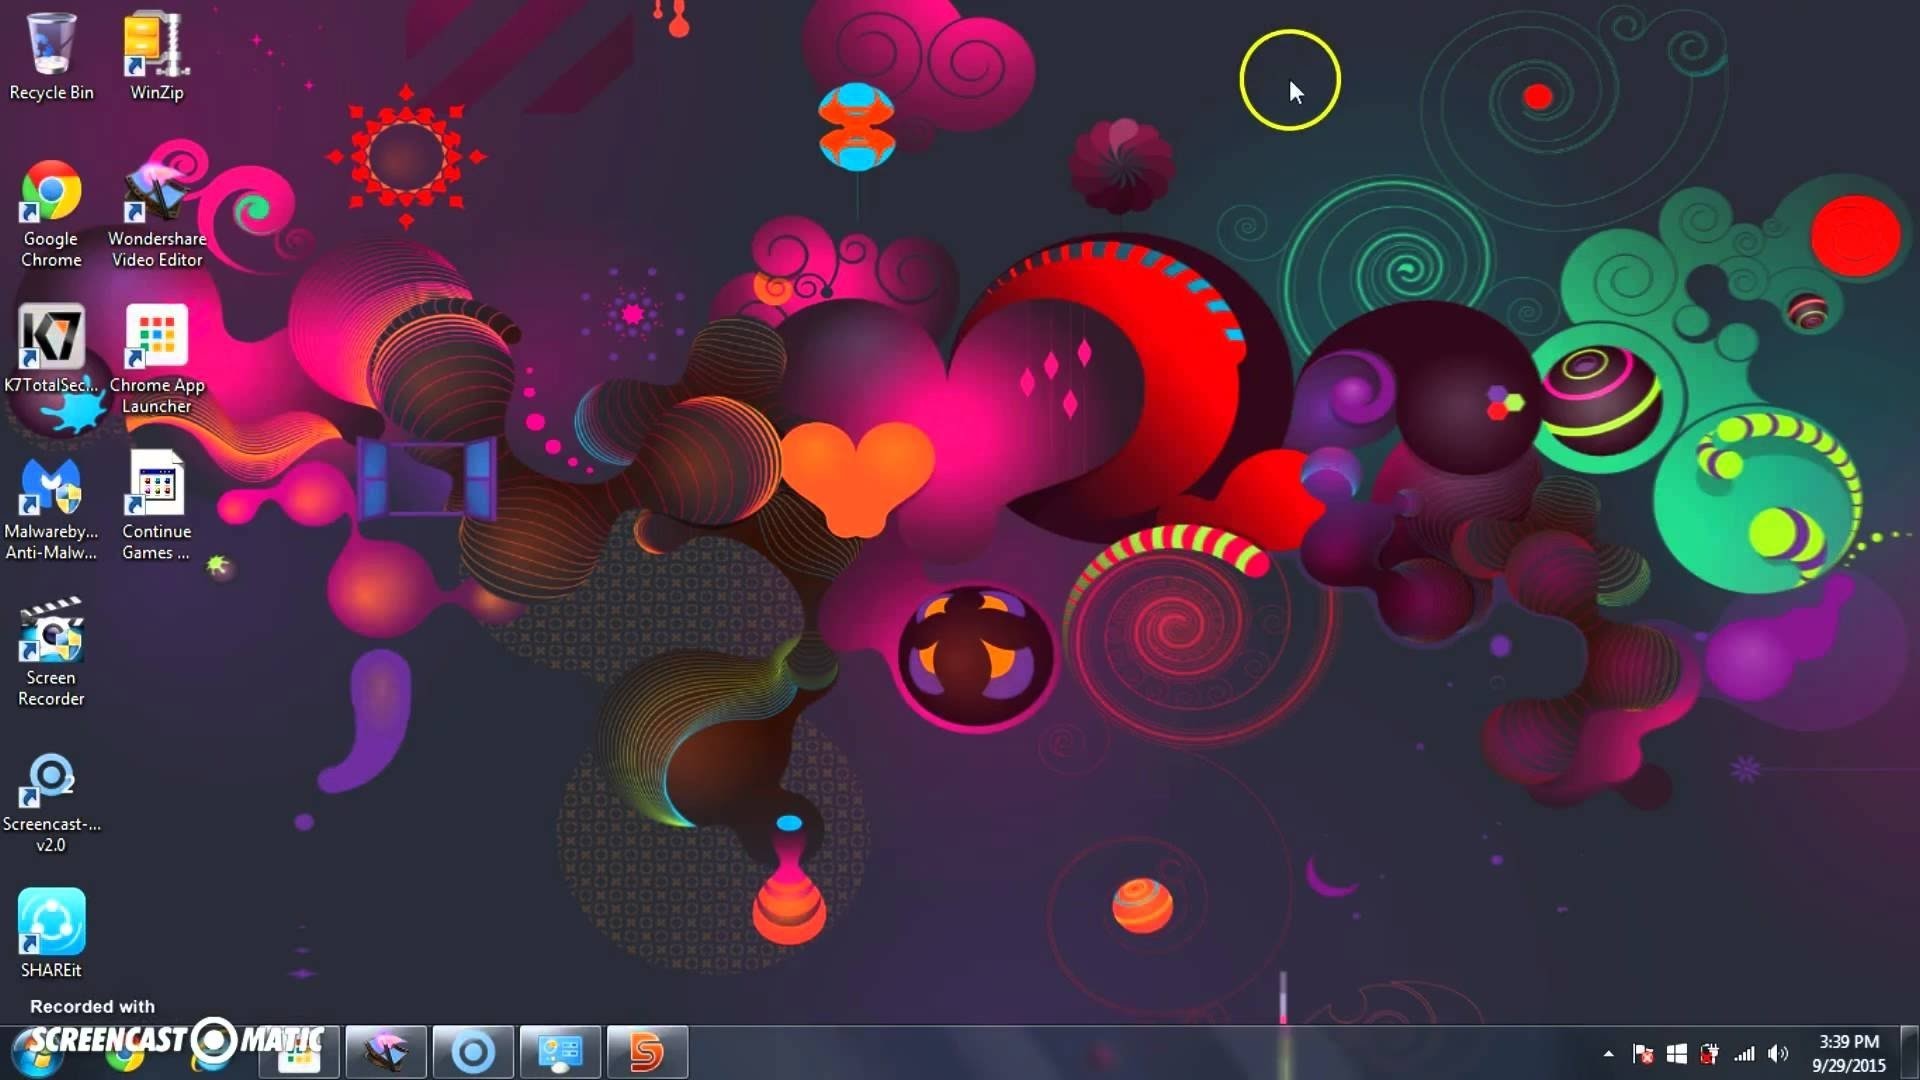 1920x1080  How to Make animated desktop wallpapers in windows 7,8,8.1 ,10